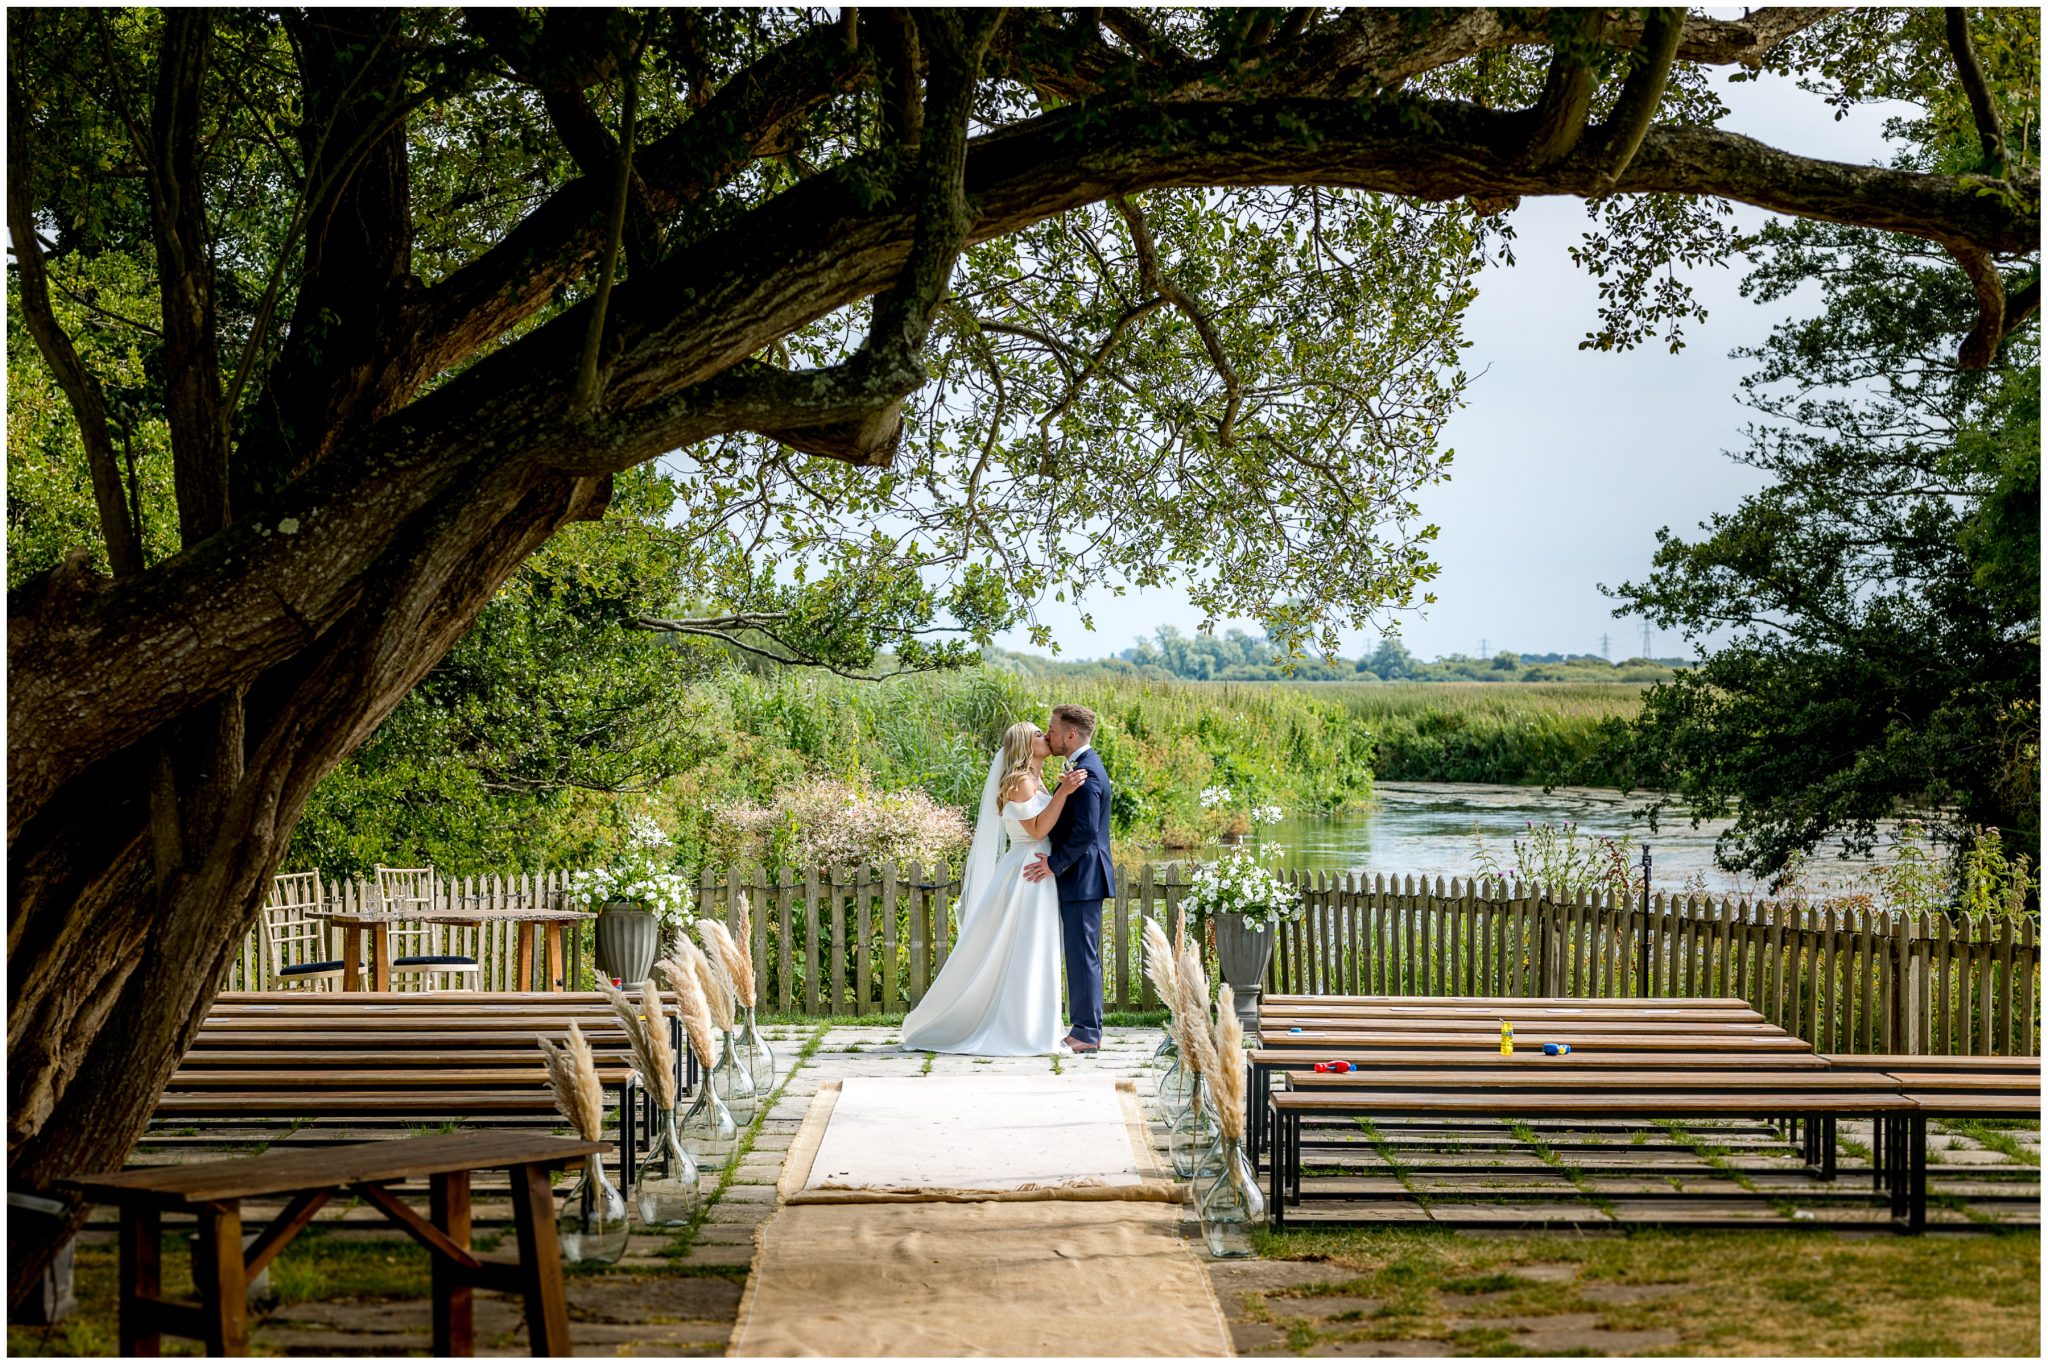 The bride and groom kiss with the river as a backdrop during their couple portraits session